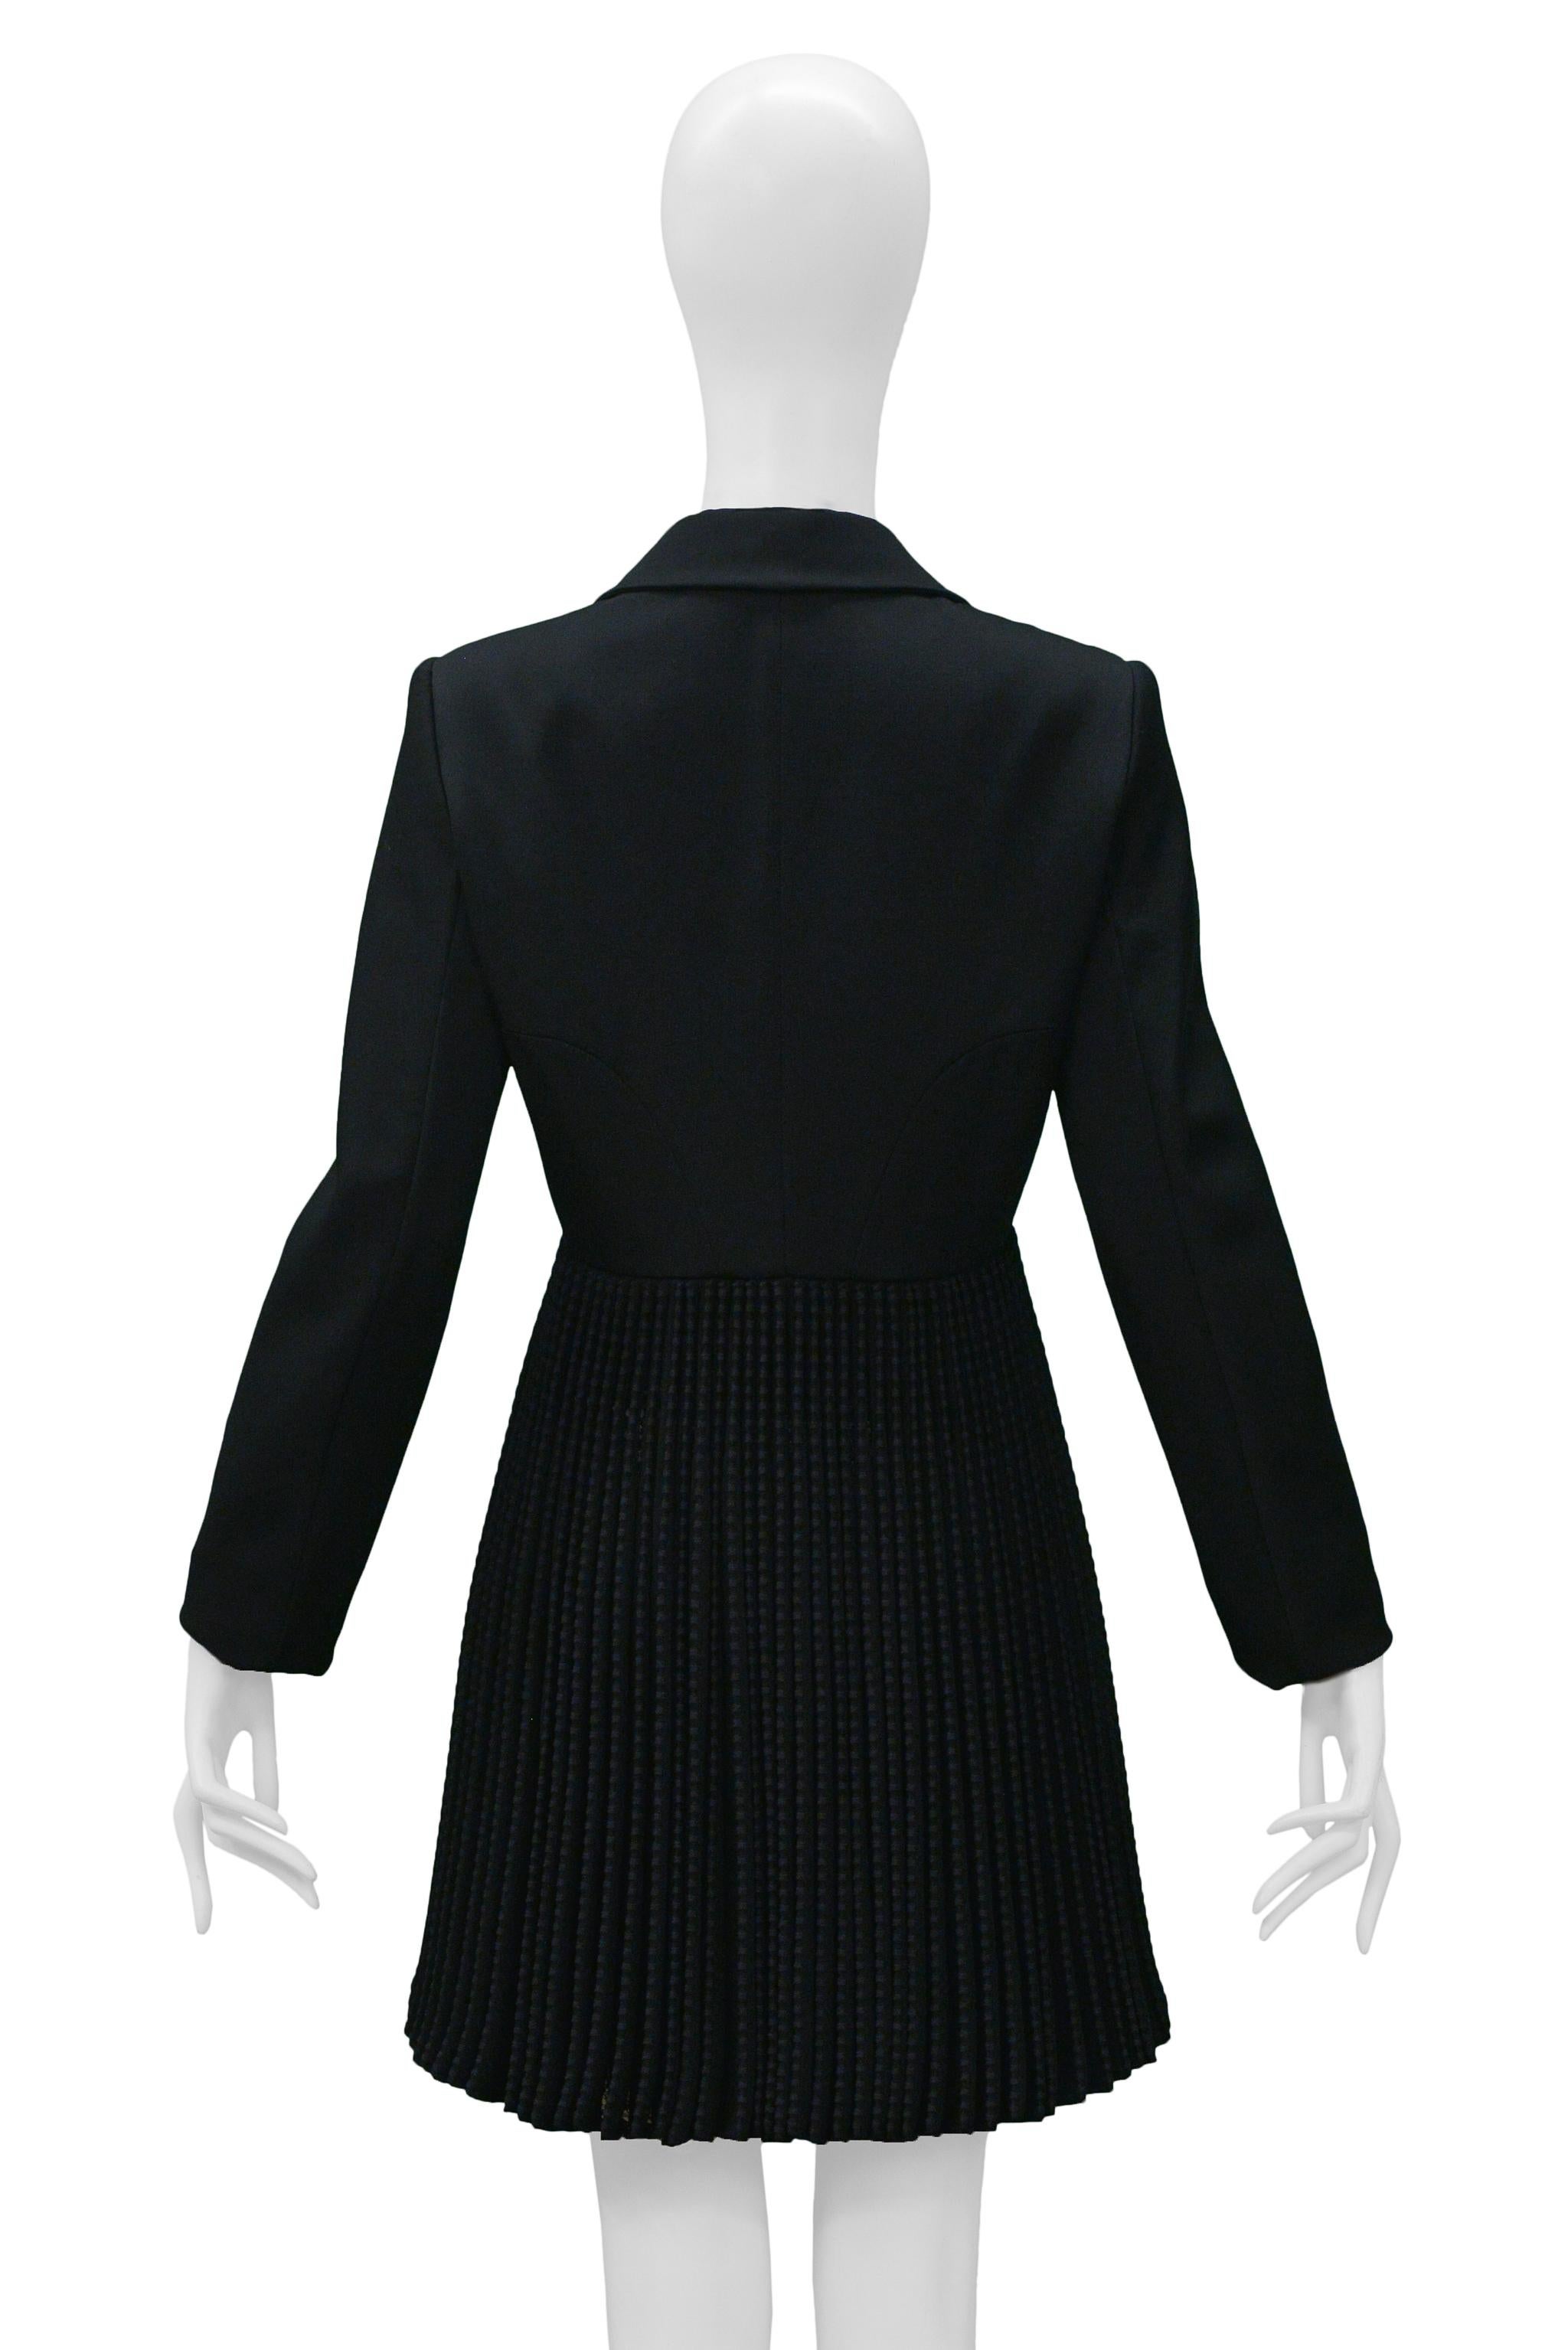 Alaia Black Coat With Pleated Lace Skirt 2